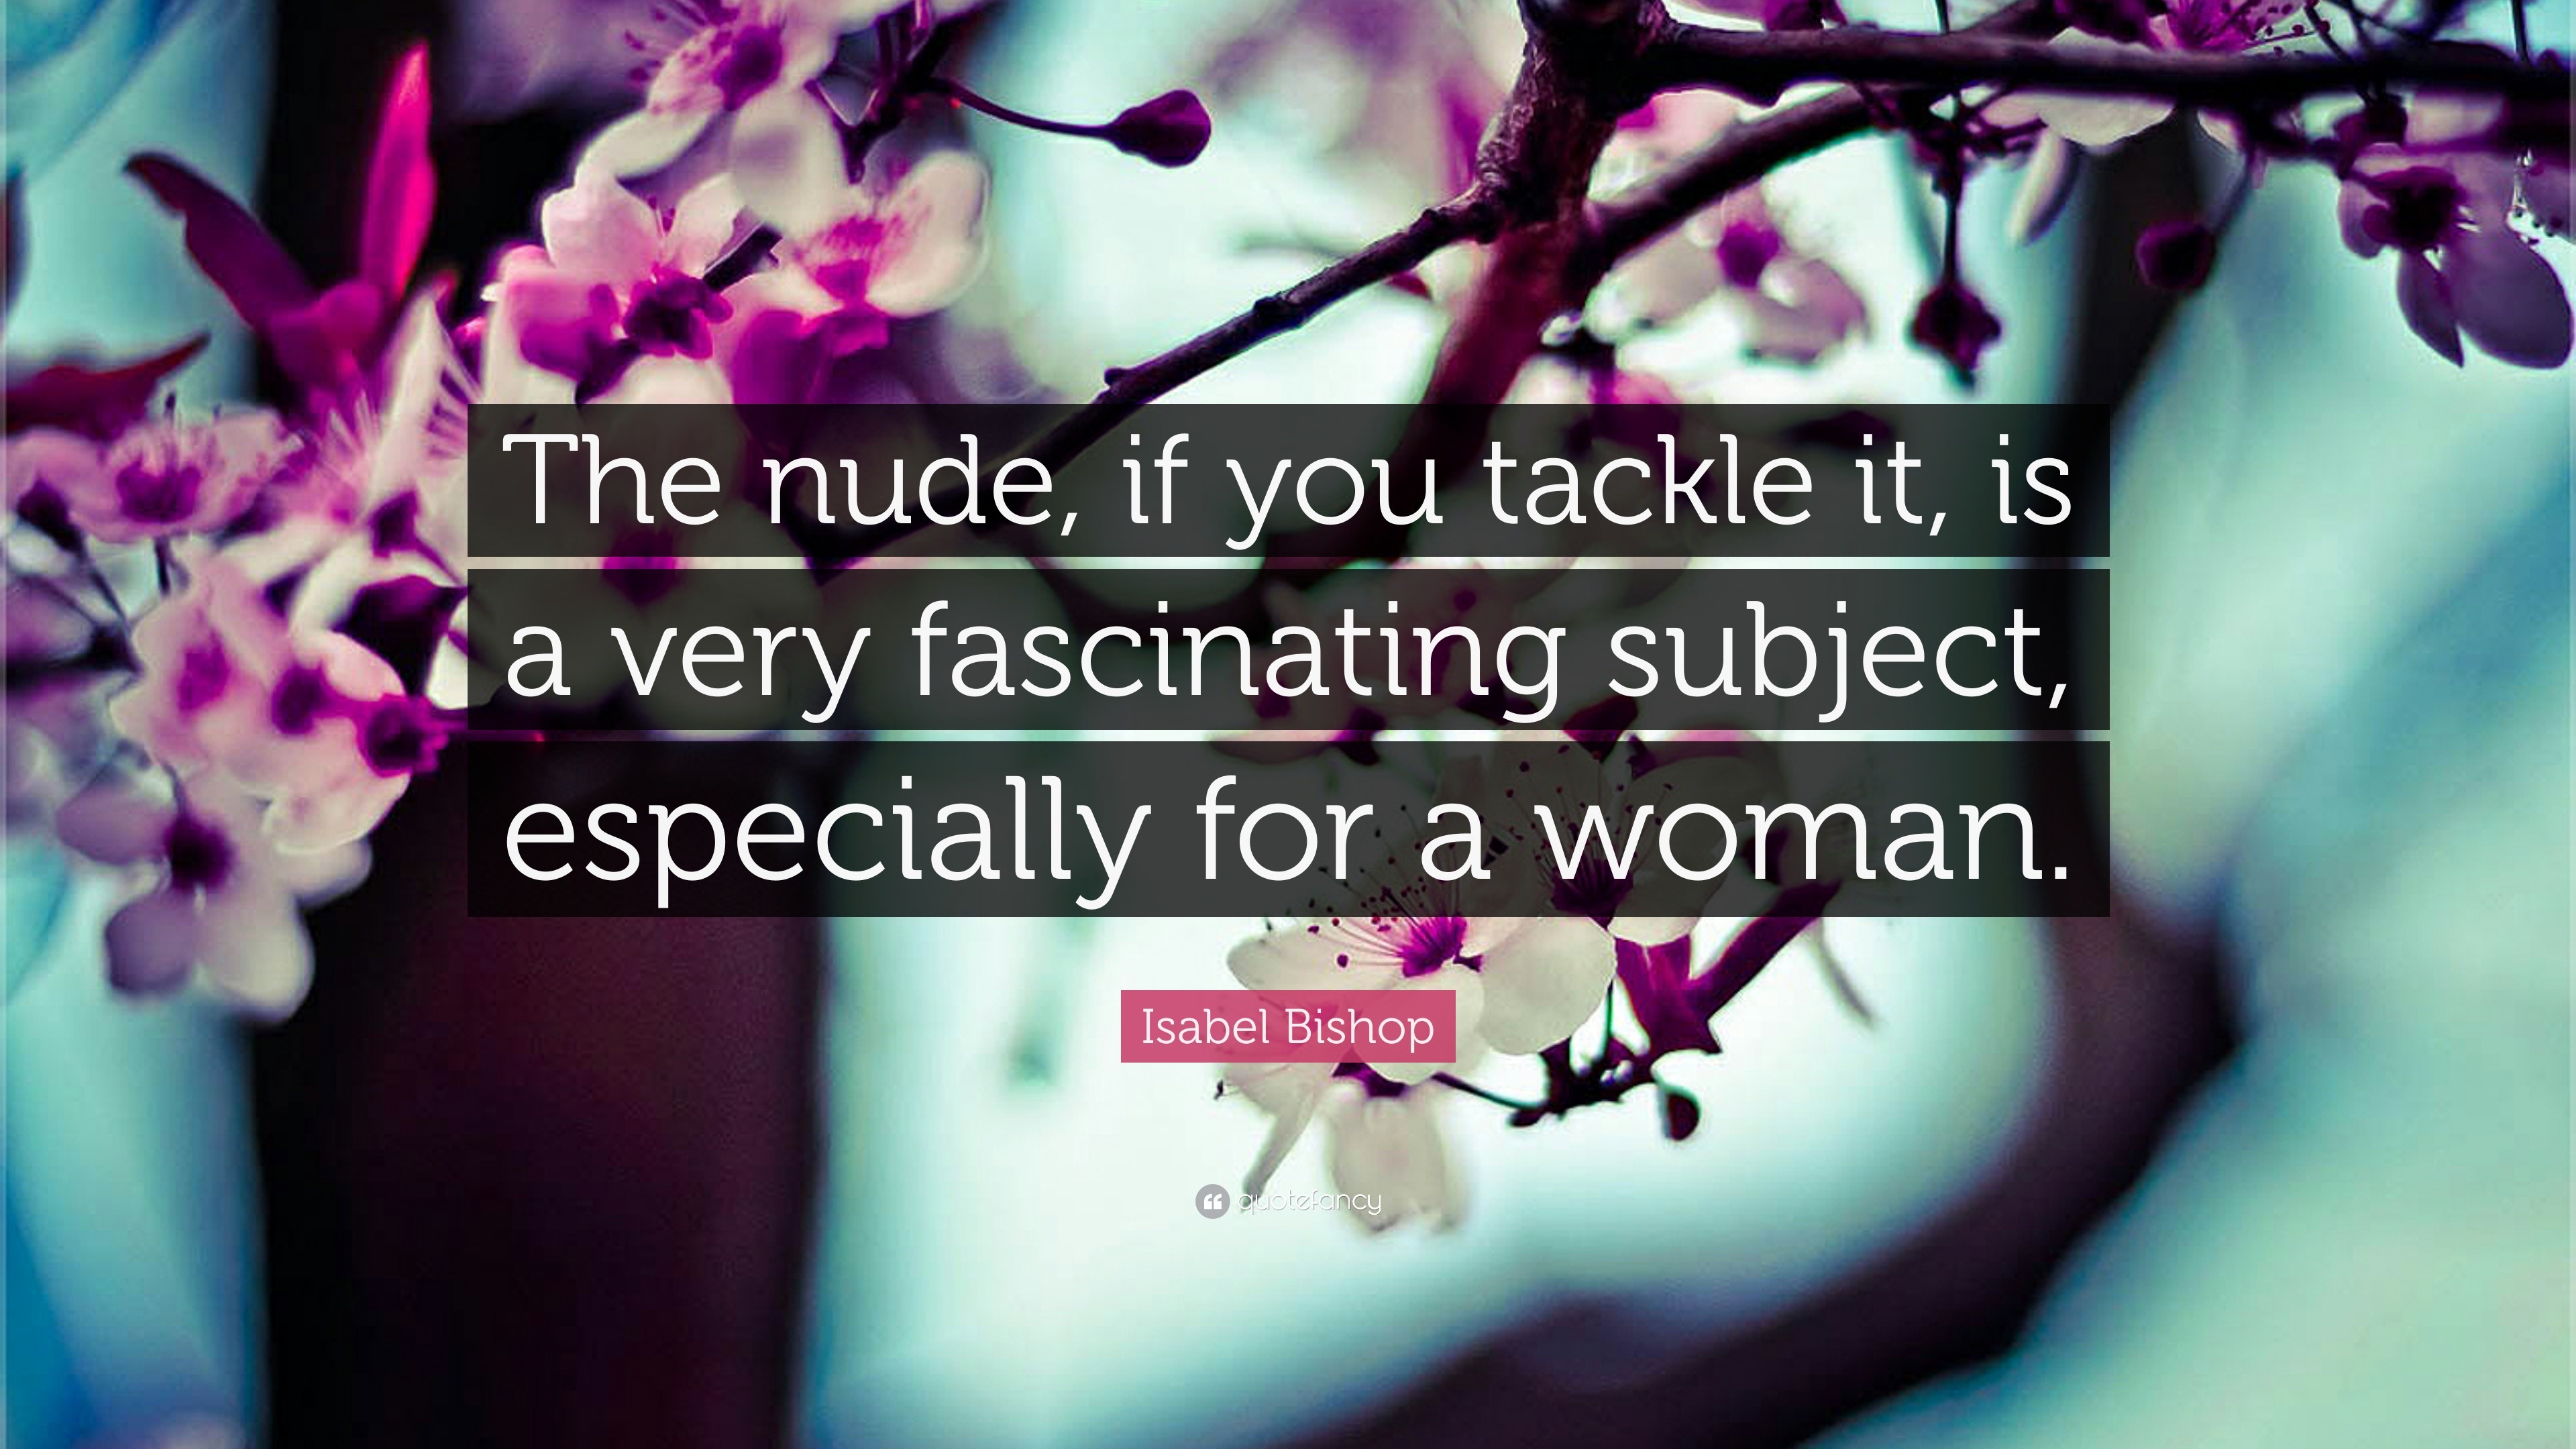 Isabel Bishop Quote: “The nude, if you tackle it, is a very ...